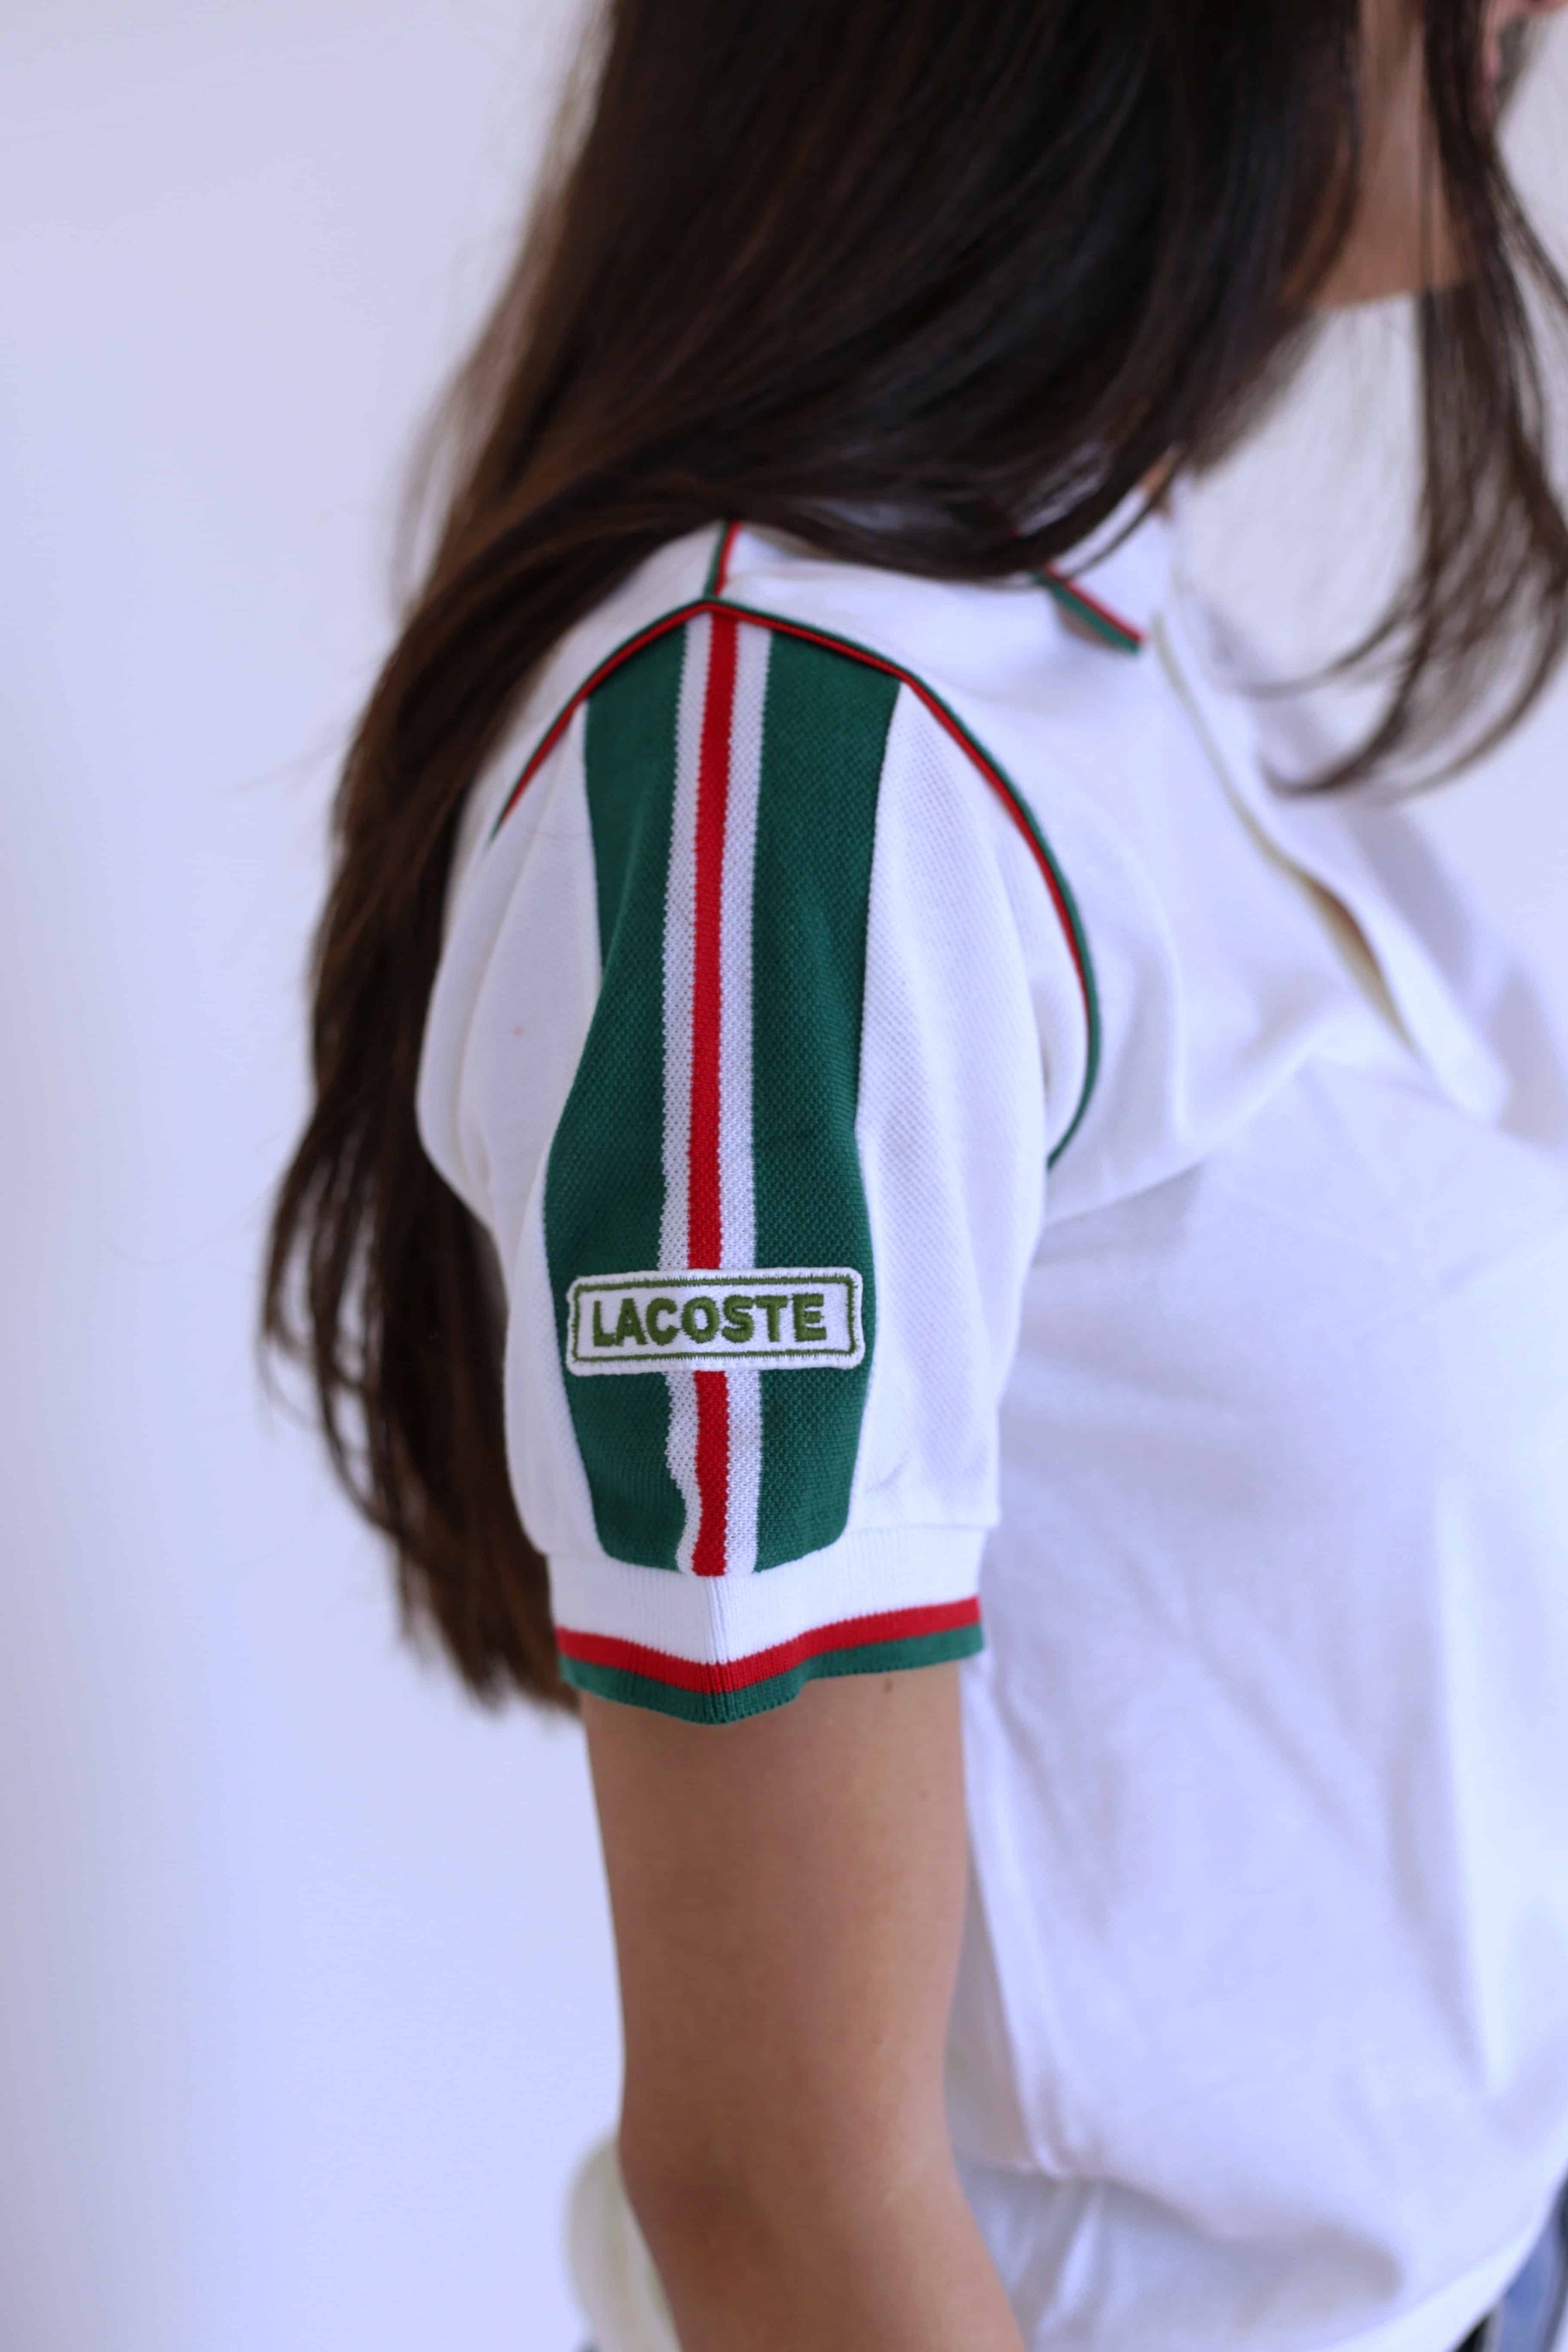 Lacoste vintage shirt in white with green stripes on the sleeves and the Lacoste logo showing, on model 